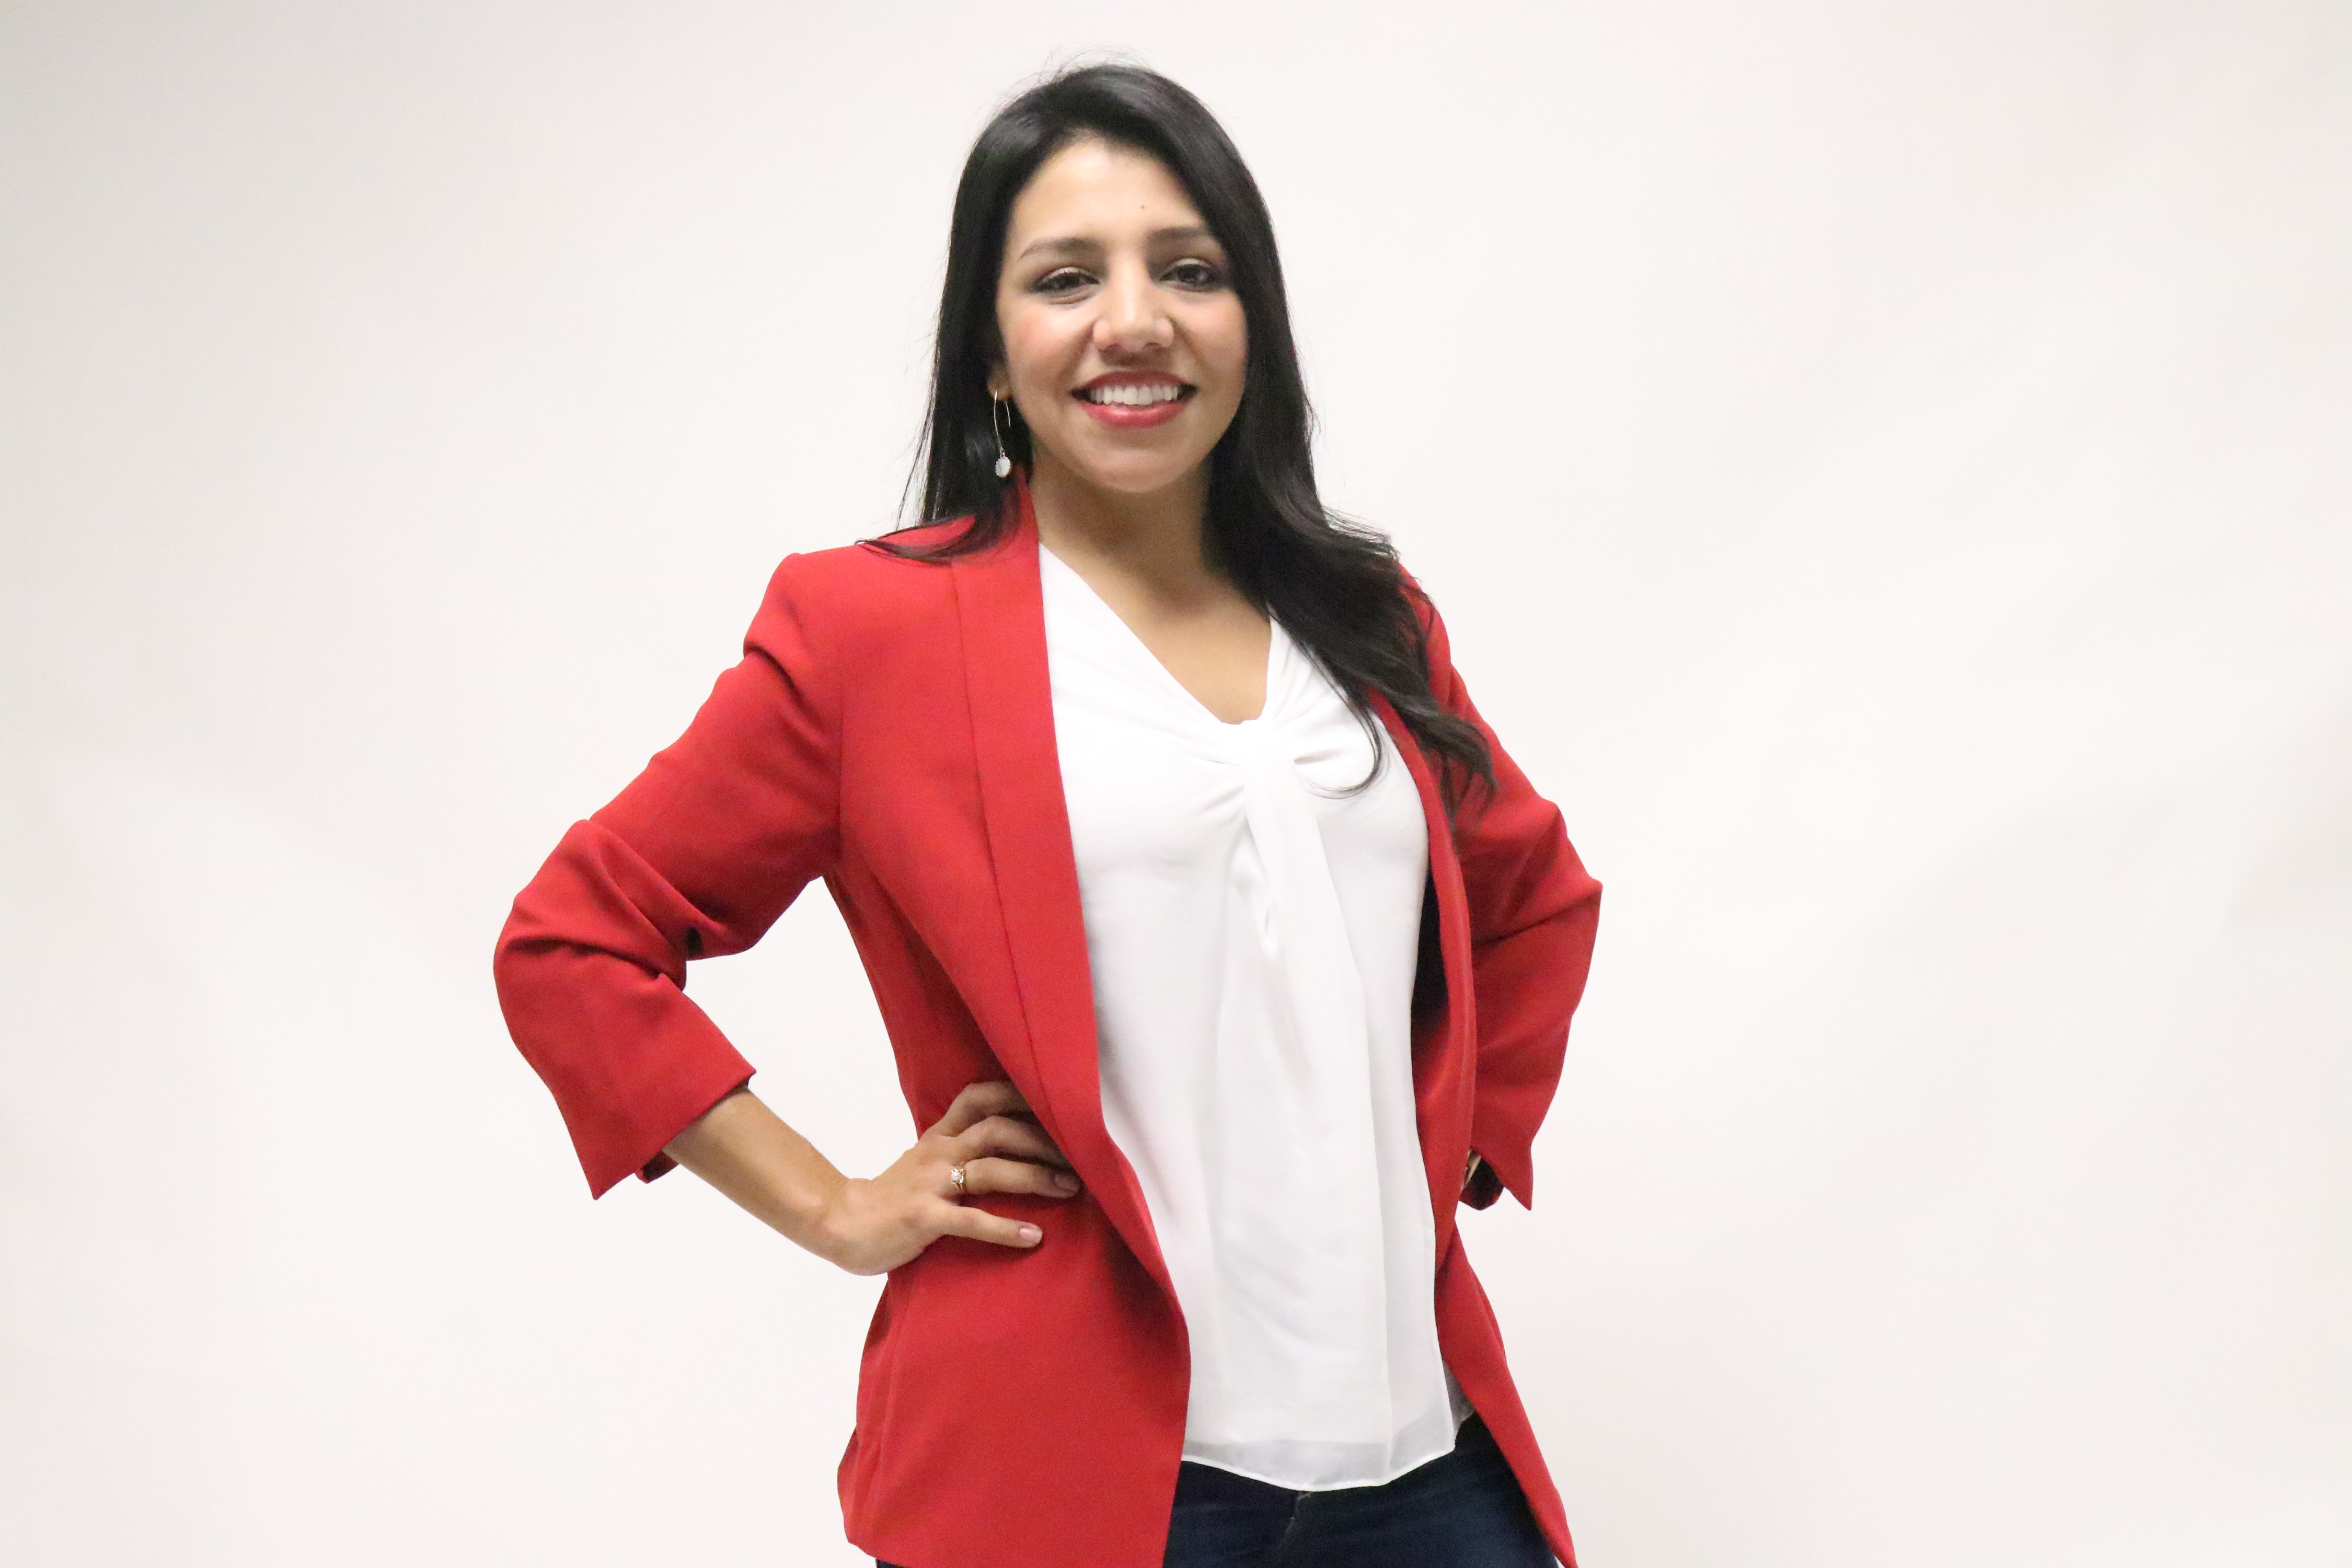 President of ALPFA Philadelphia, Adria Córdova, who has been a member of the organization for over 10 years, hopes to use her new platform to help inspire and connect the next generation of Latino leaders. Photo: Nigel Thompson/AL DÍA News. 